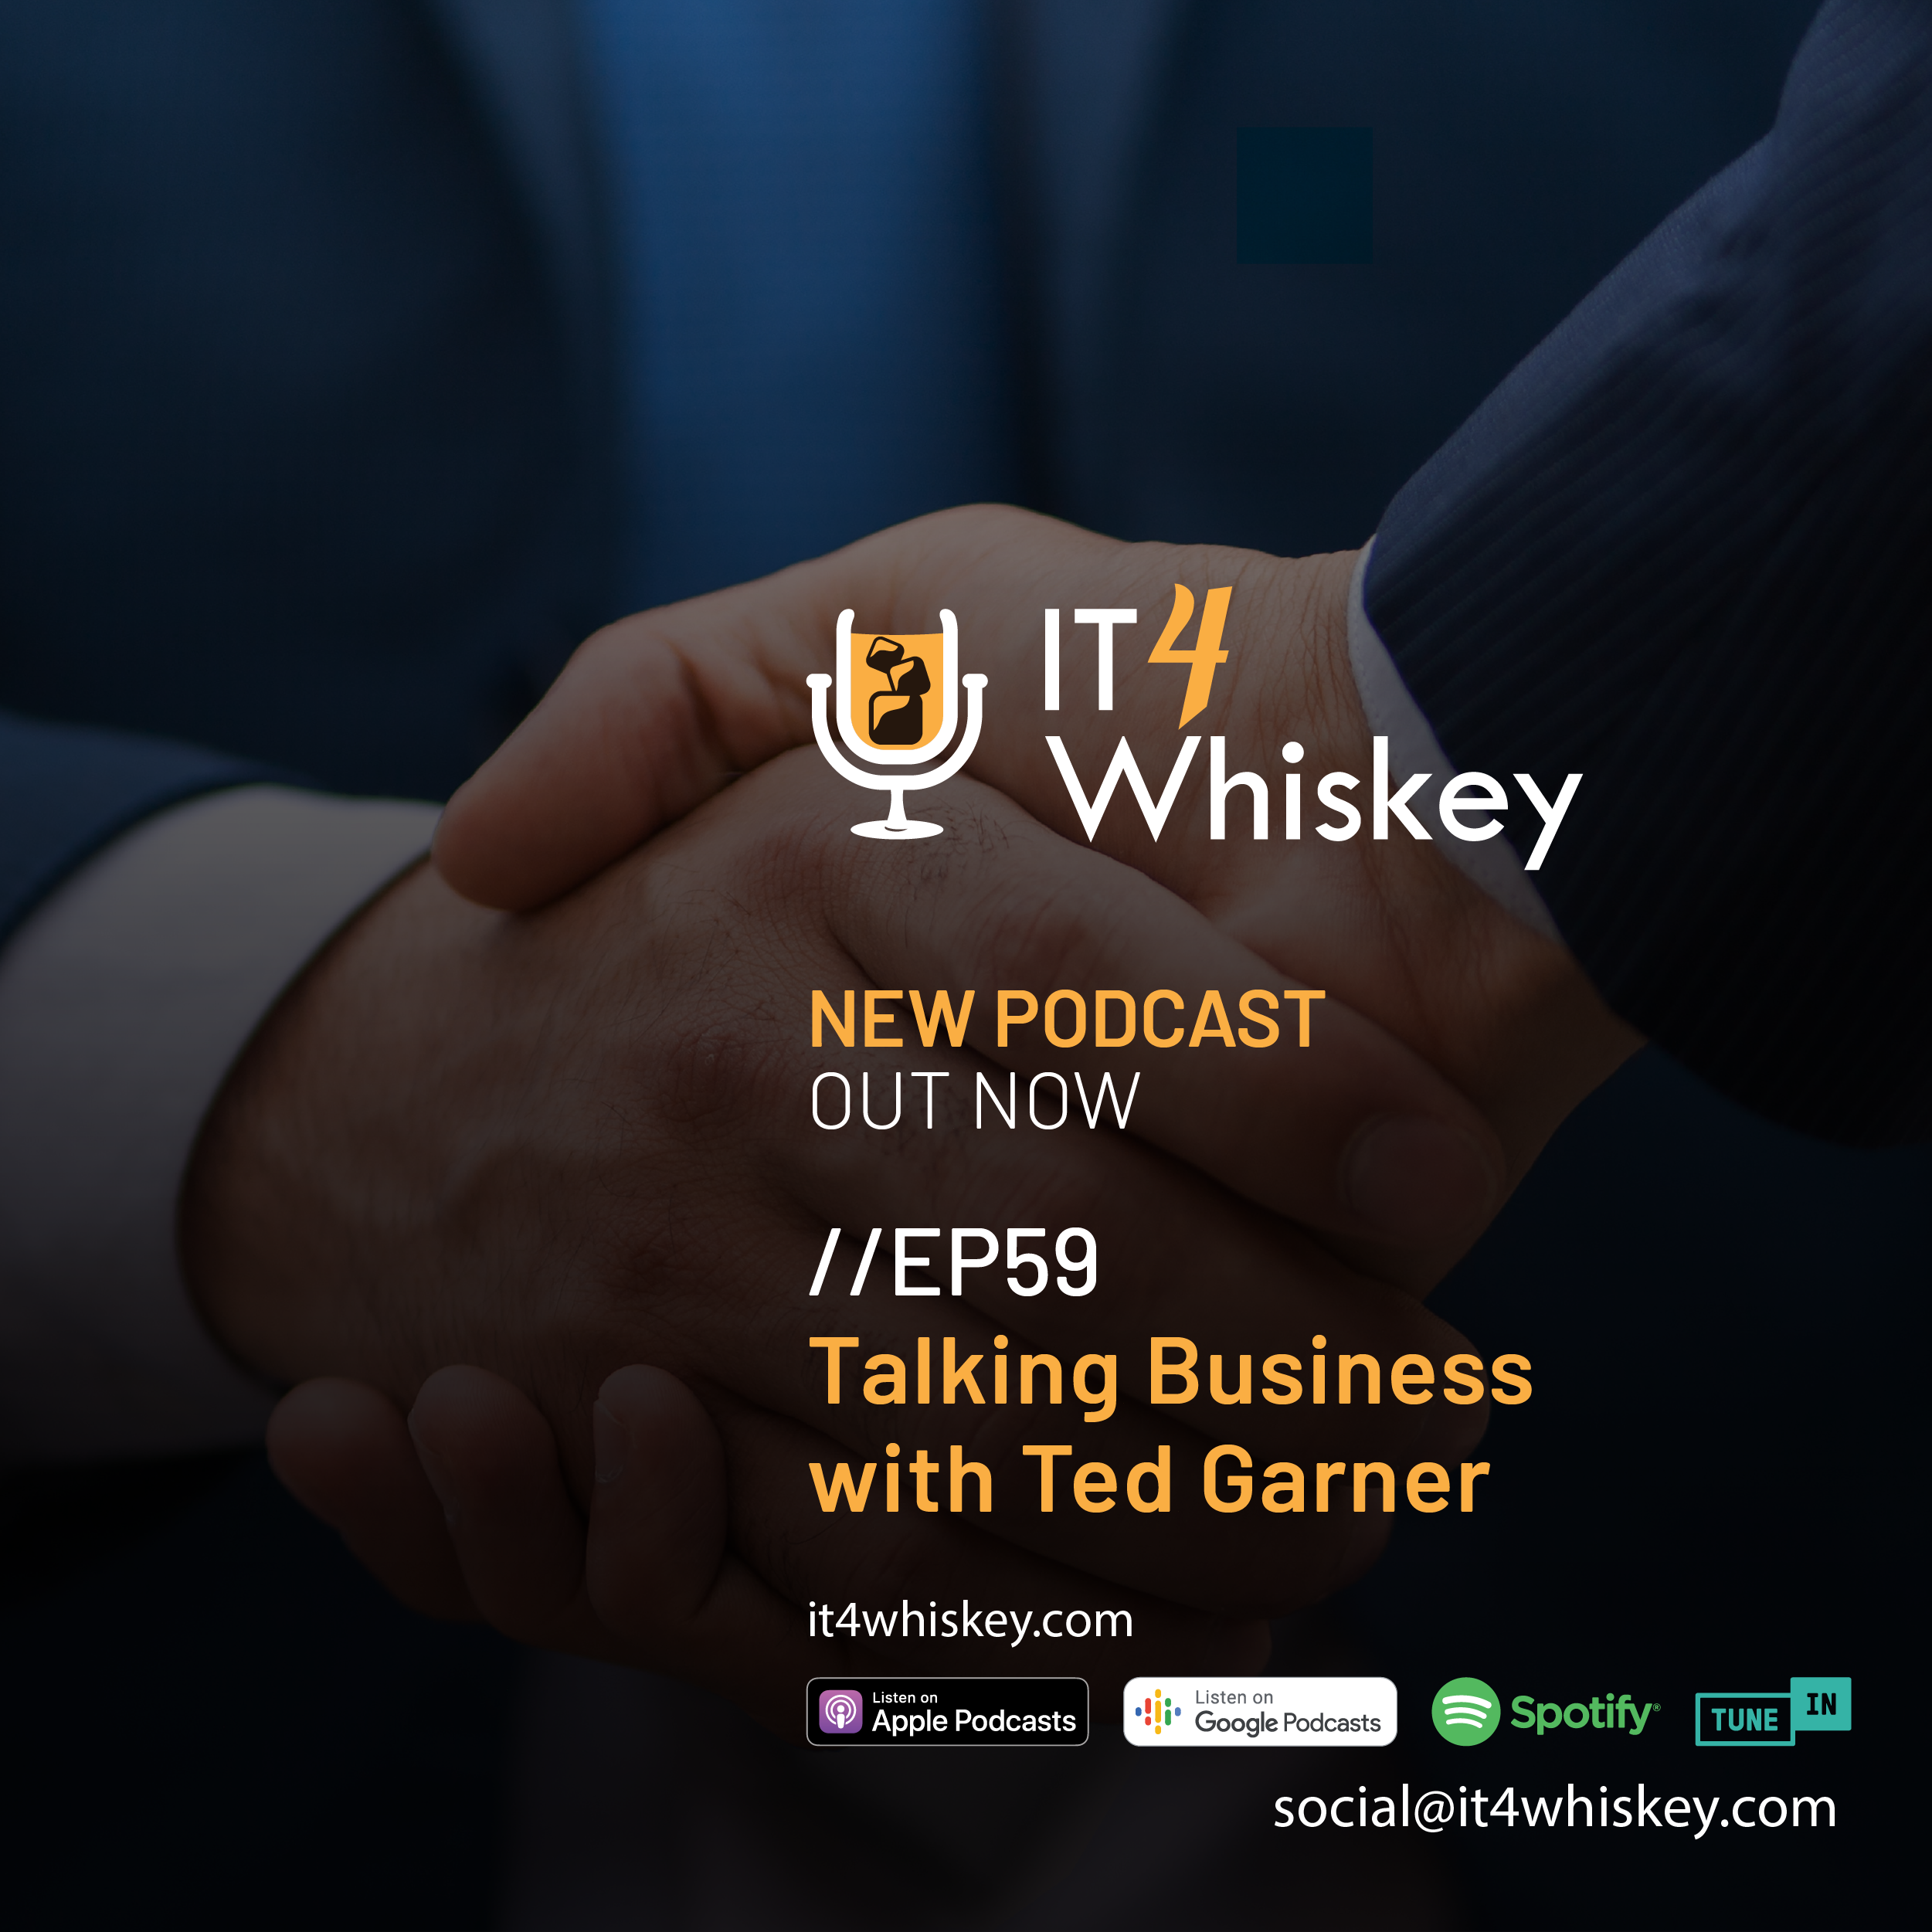 EP59 - Talking Business with Ted Garner